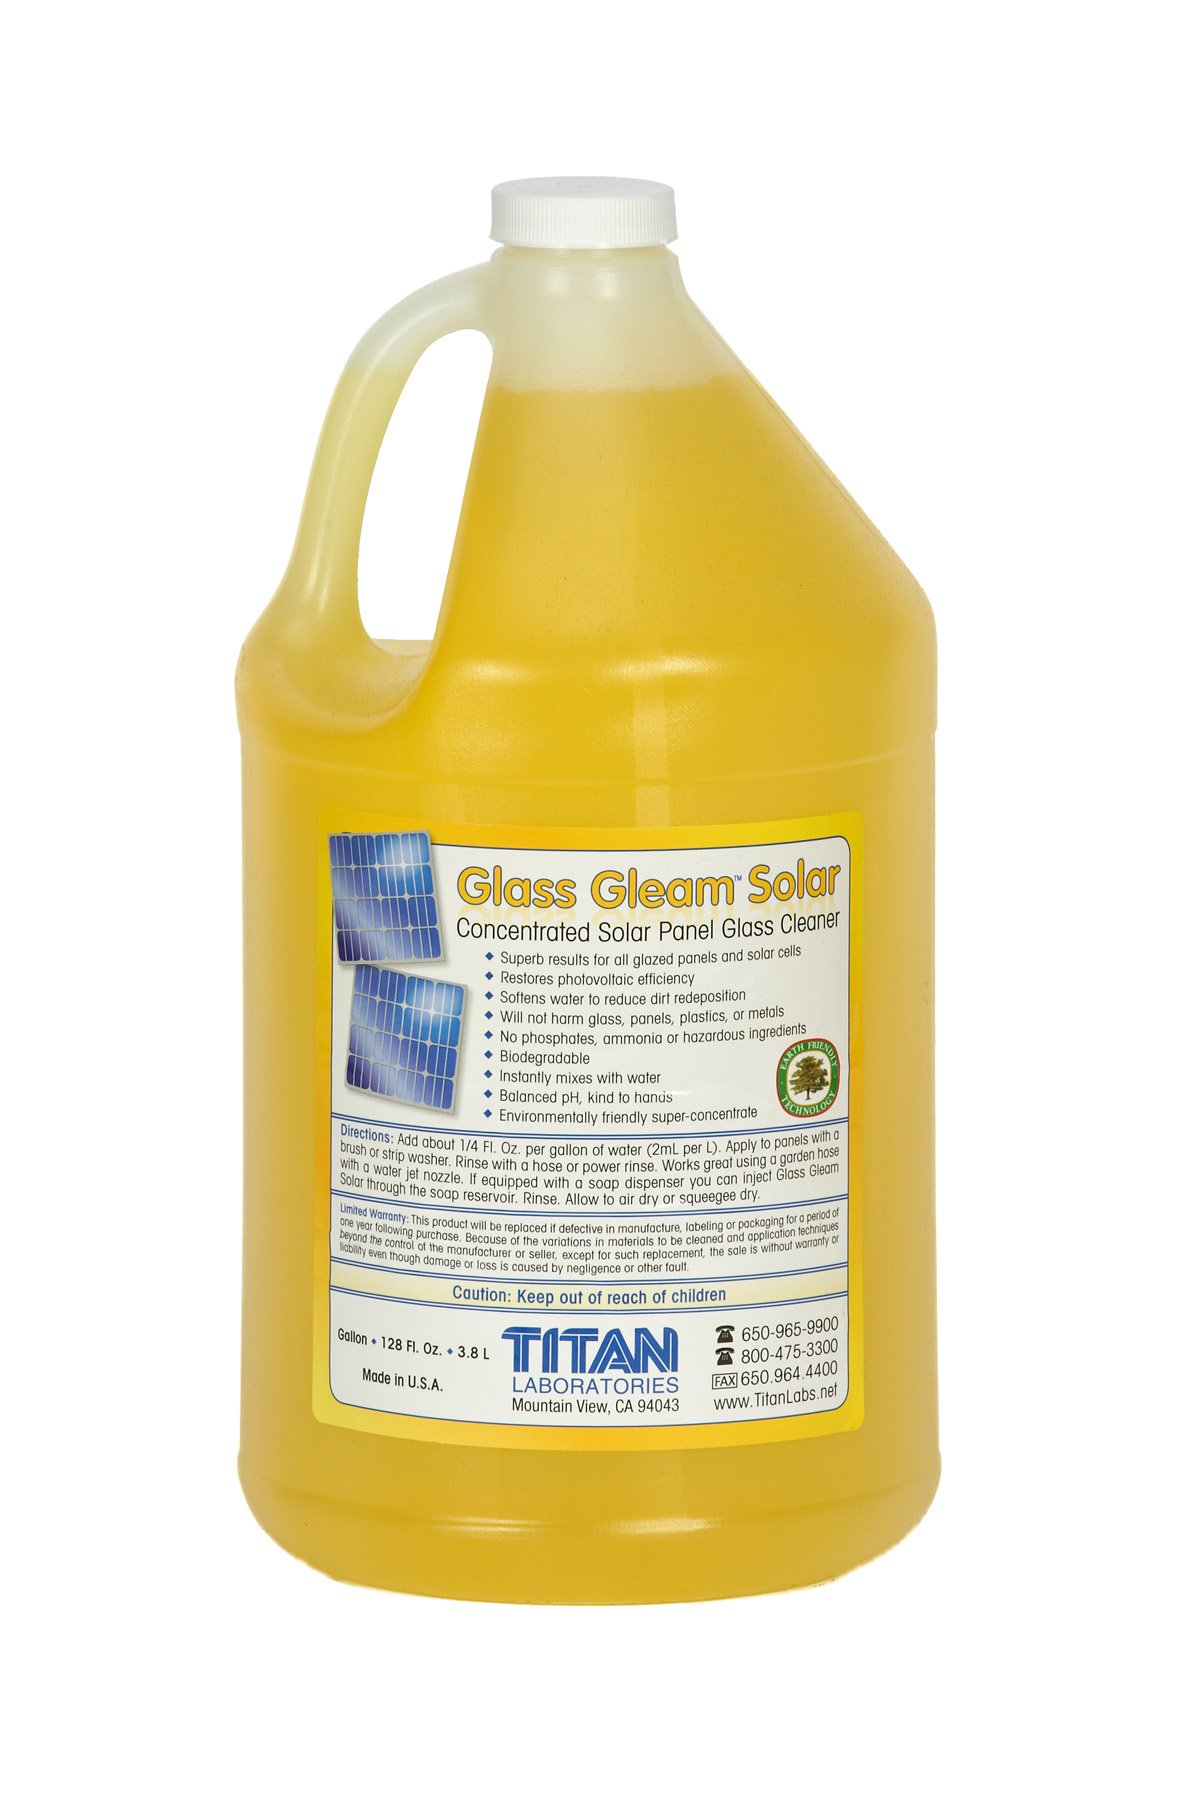 Glass Gleam Solar - Solar Panel Cleaner - Highly Concentrated - 1 Gallon Makes 500 Gallons of RTU Product (1 Gallon)